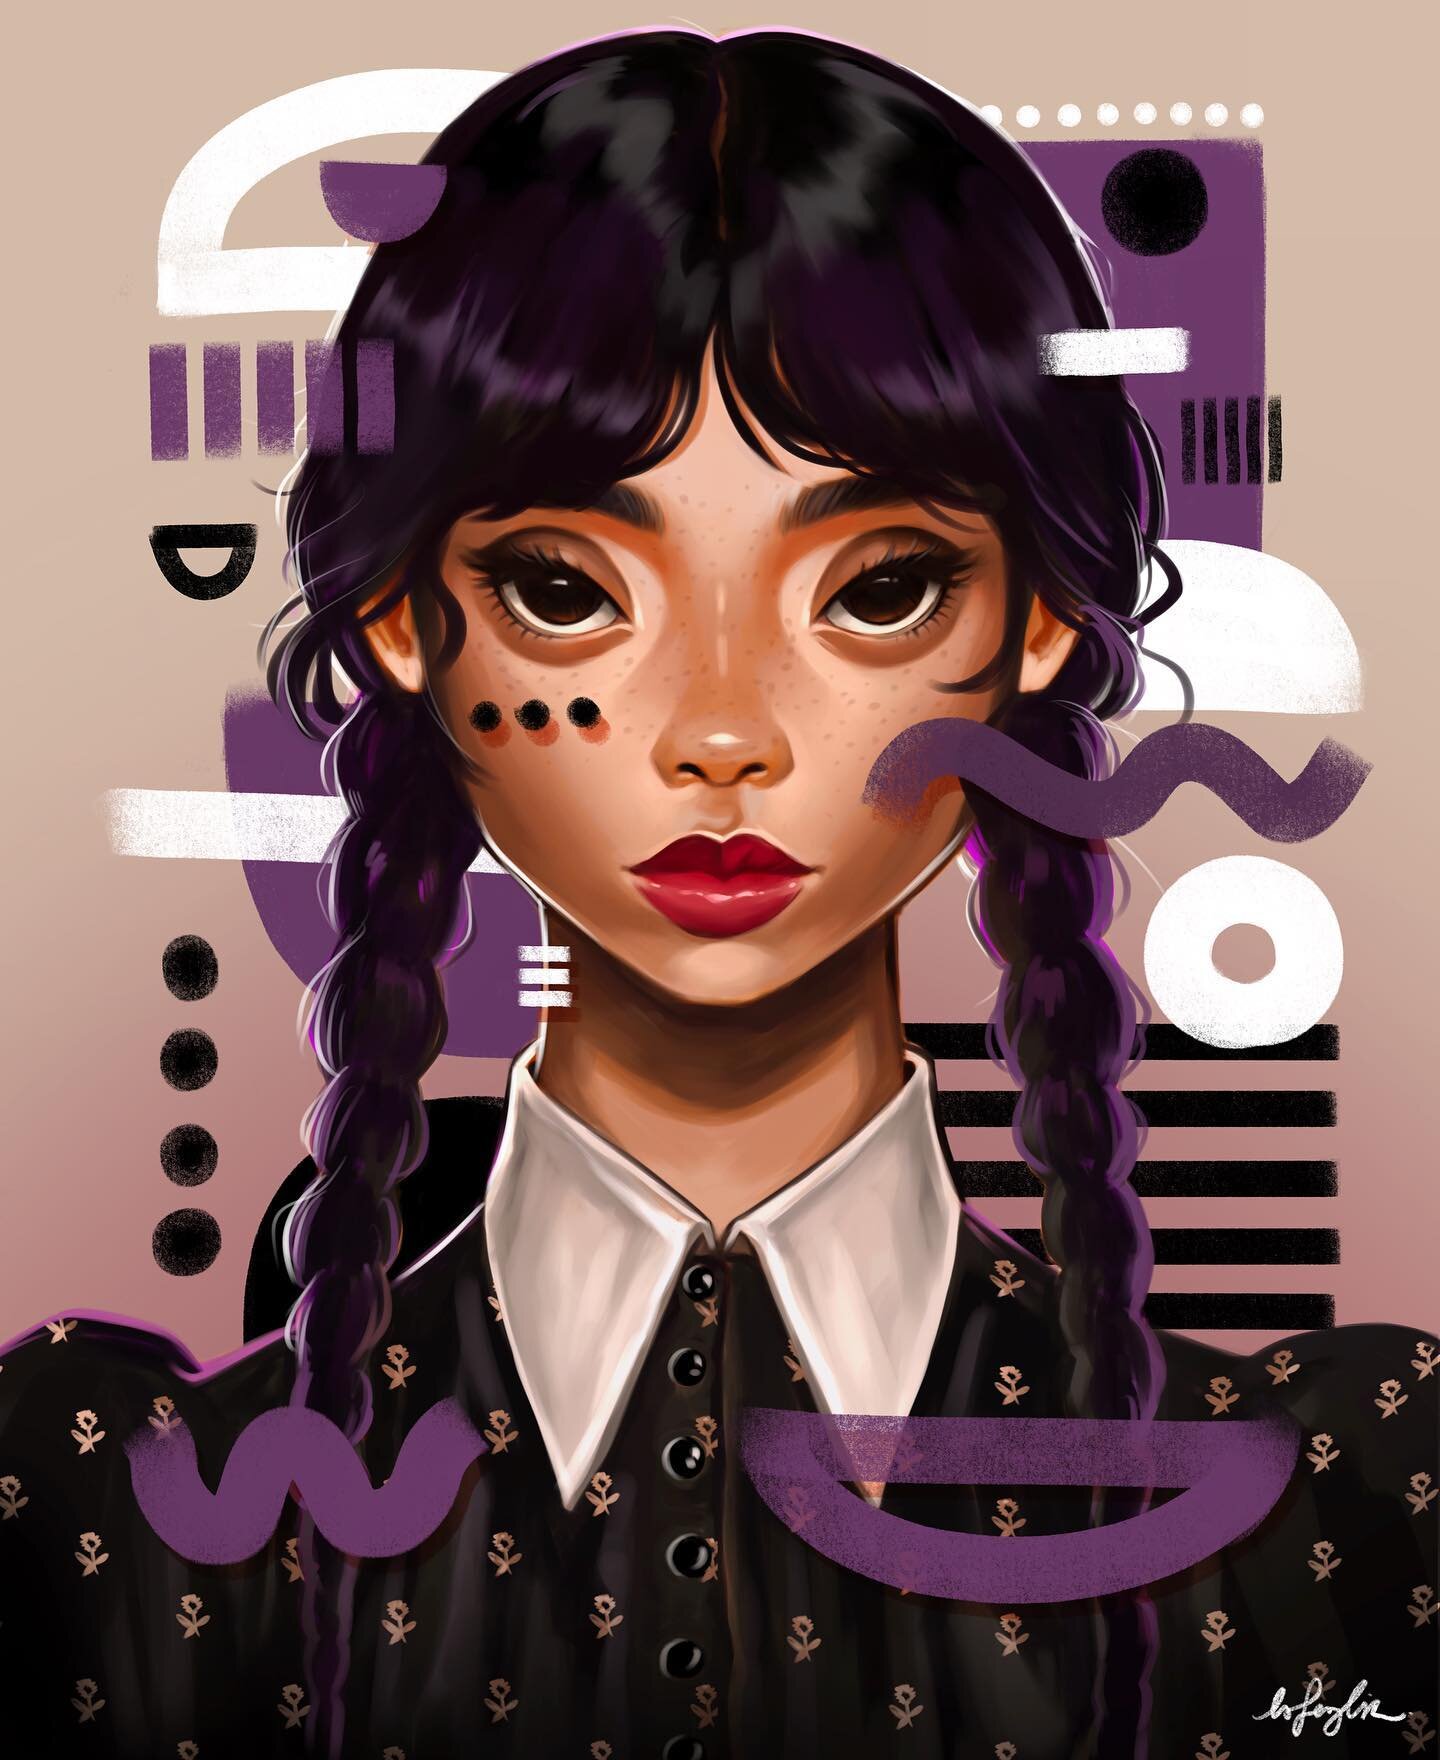 After watching #wednesdaynetflix I needed to update my previous artwork to make her look more like Wednesday Addams. Can&rsquo;t wait for season 2! 
Have you watched it yet? 👋🏼

#art #illustration #wednesdayaddams #jennaortega #digitalart #addamsfa